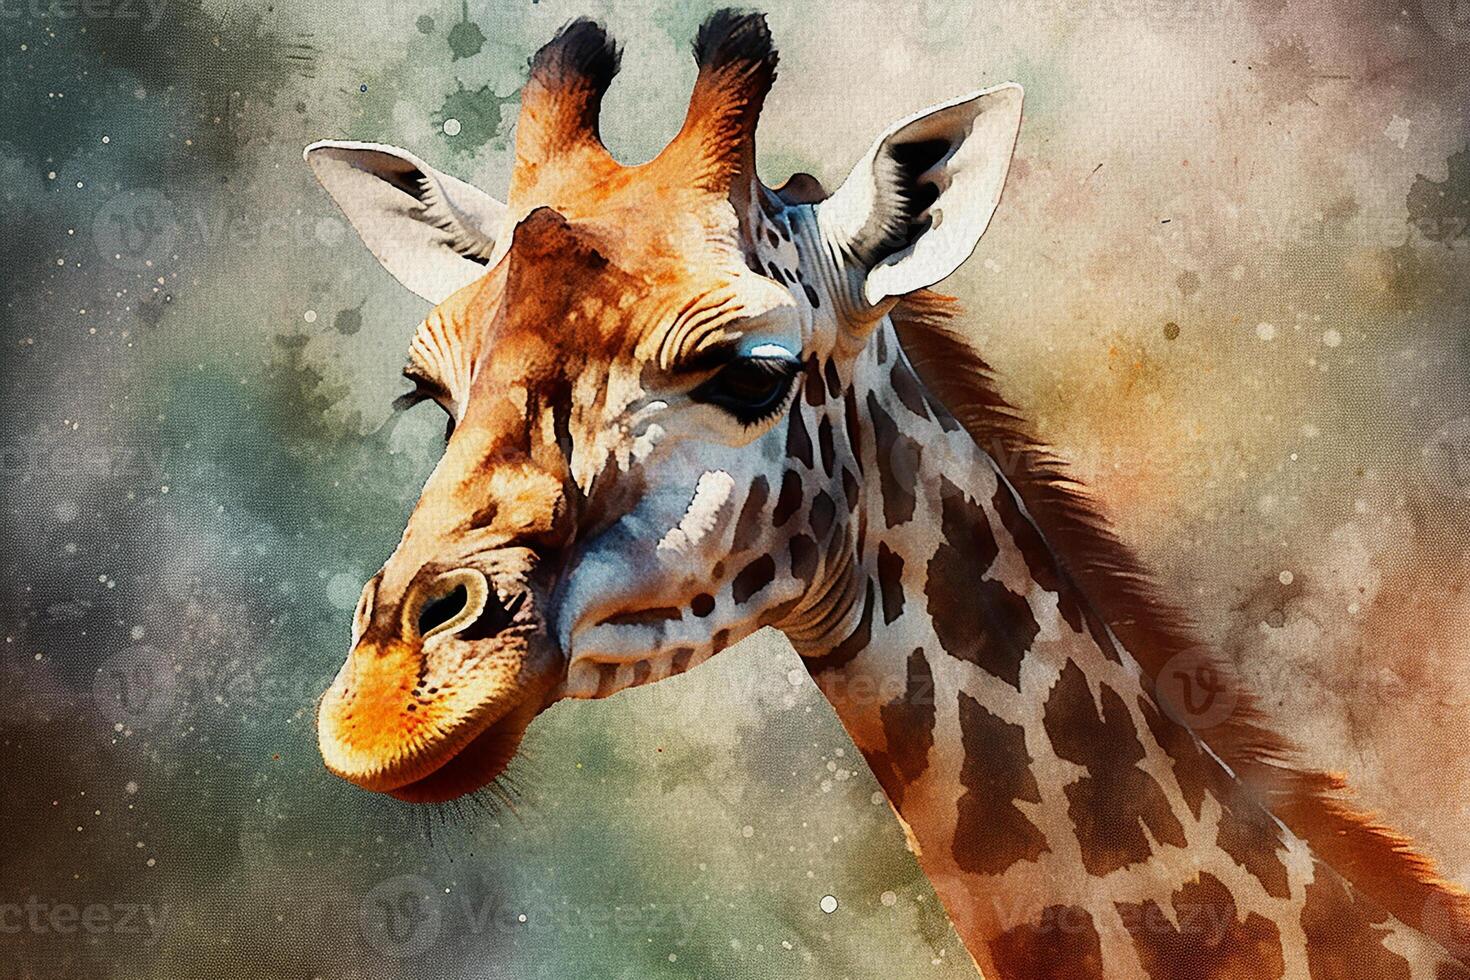 Giraffe, portrait of an animal looking straight ahead, watercolor painting on textured paper. Digital watercolor painting. photo